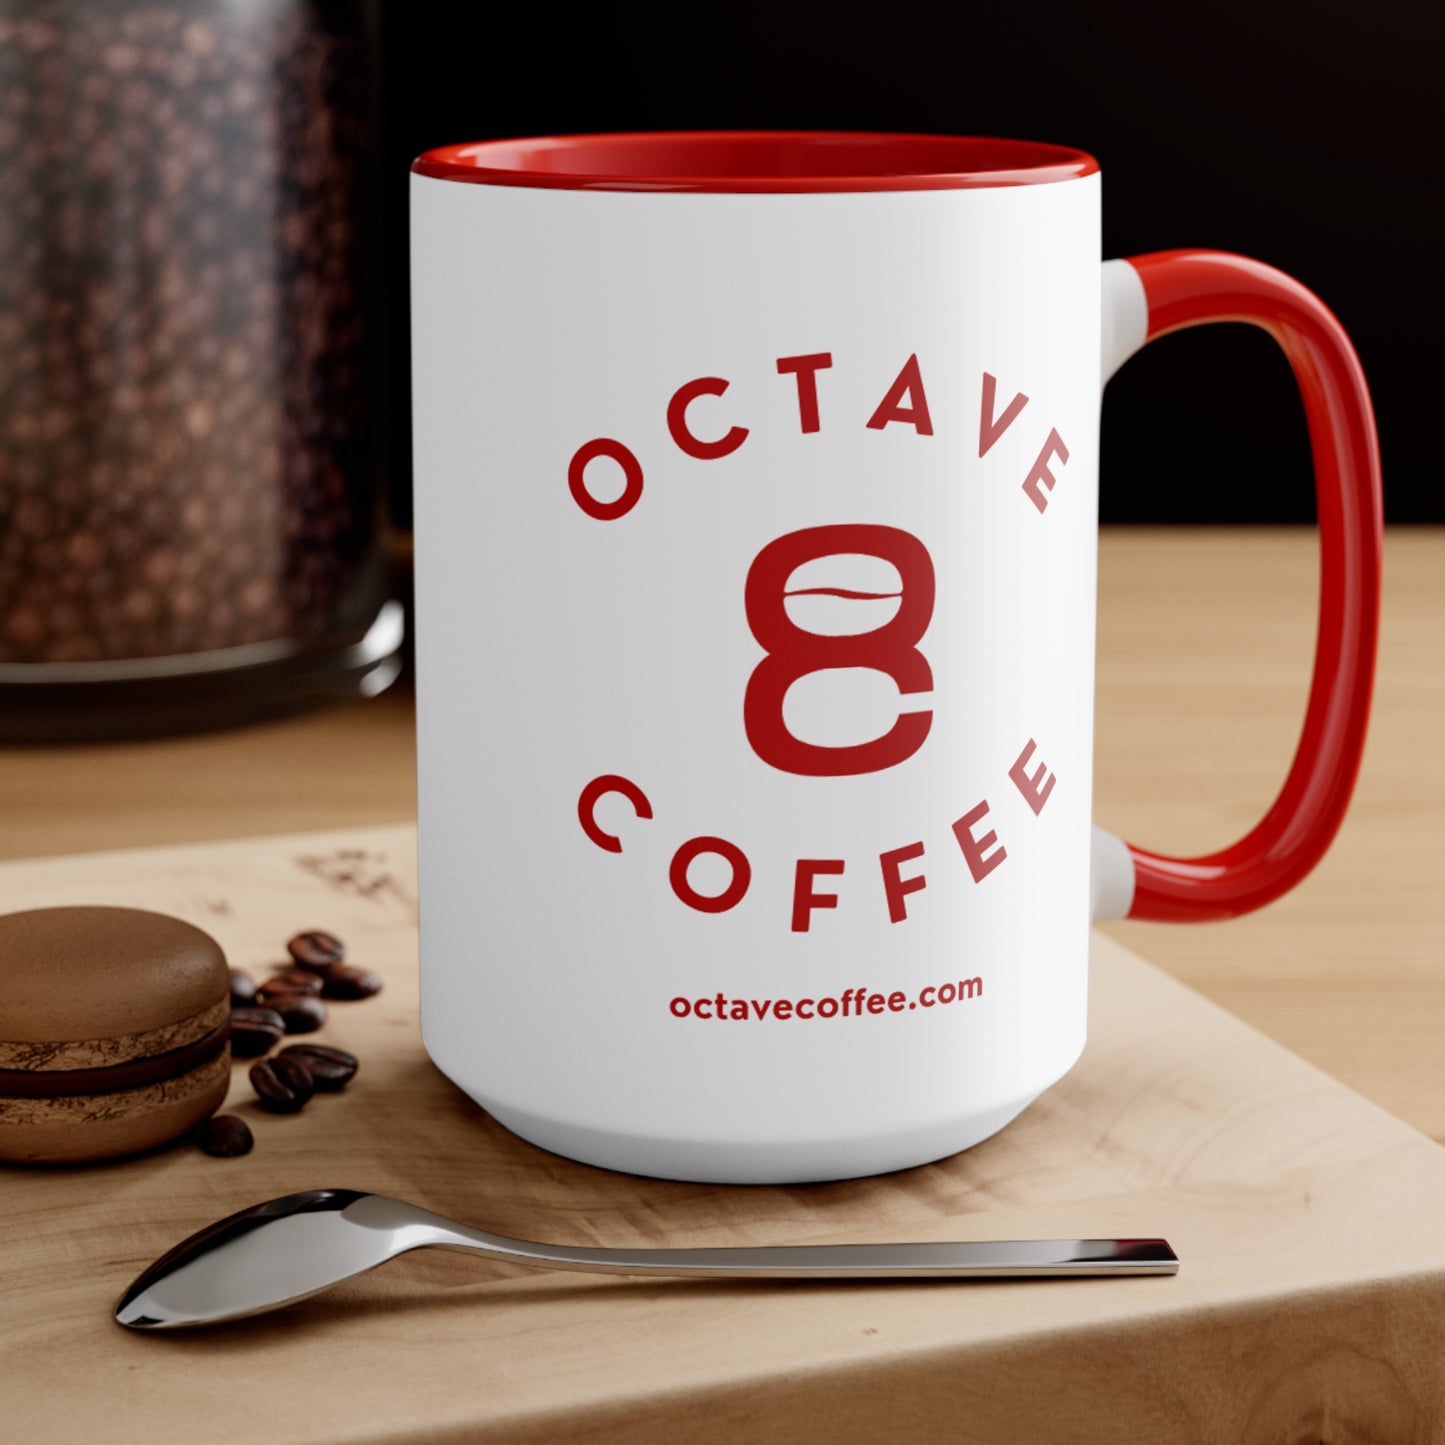 Octave Coffee Two-Tone Mug - Octave Coffee Co.